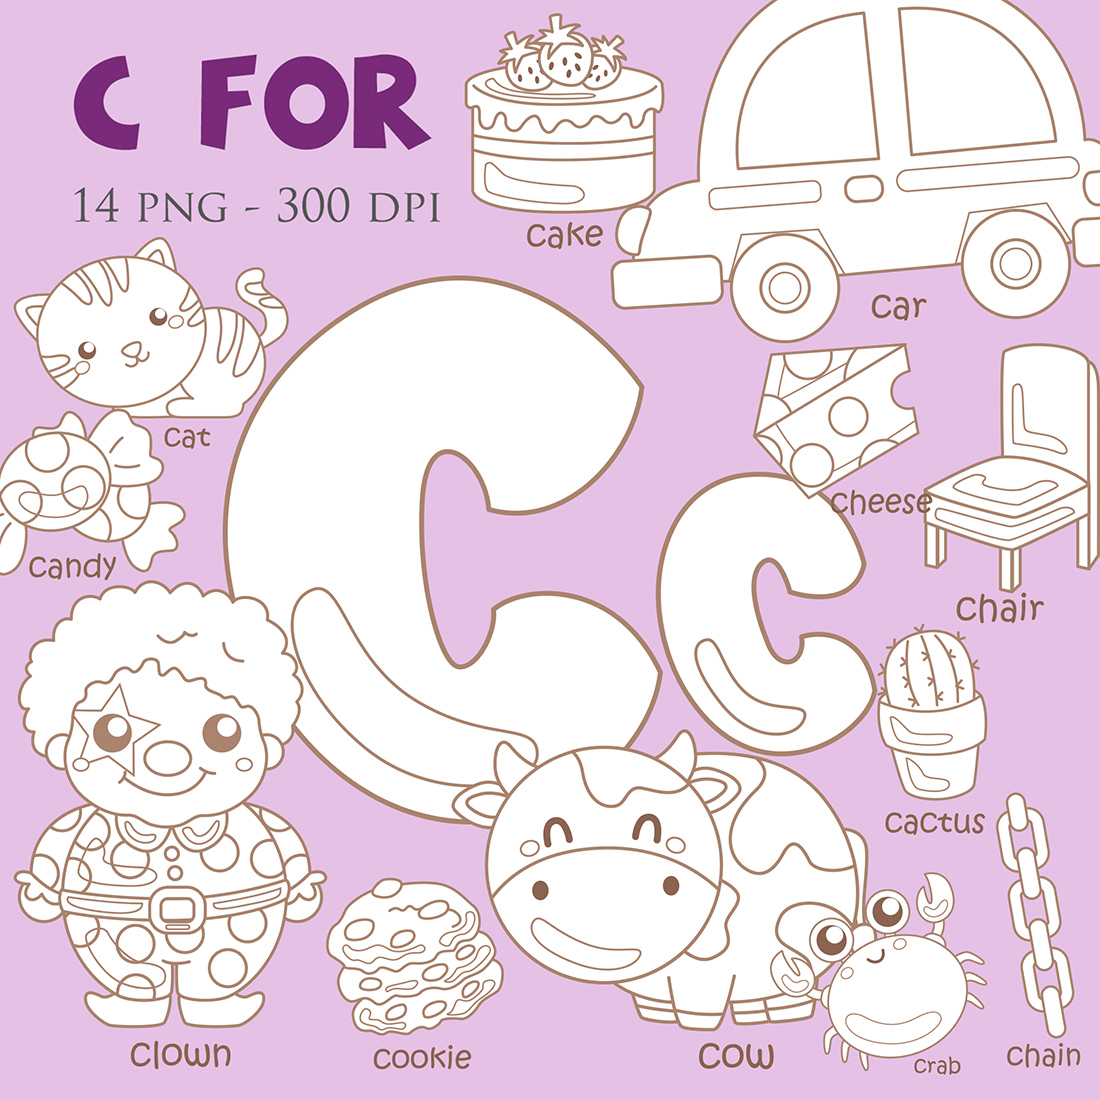 Alphabet C For Vocabulary School Letter Reading Writing Font Study Learning Student Toodler Kids Car Crab Cake Clown Cookie Cow Cactus Cheese Candy Chain Chair Cat Cartoon Digital Stamp Outline cover image.